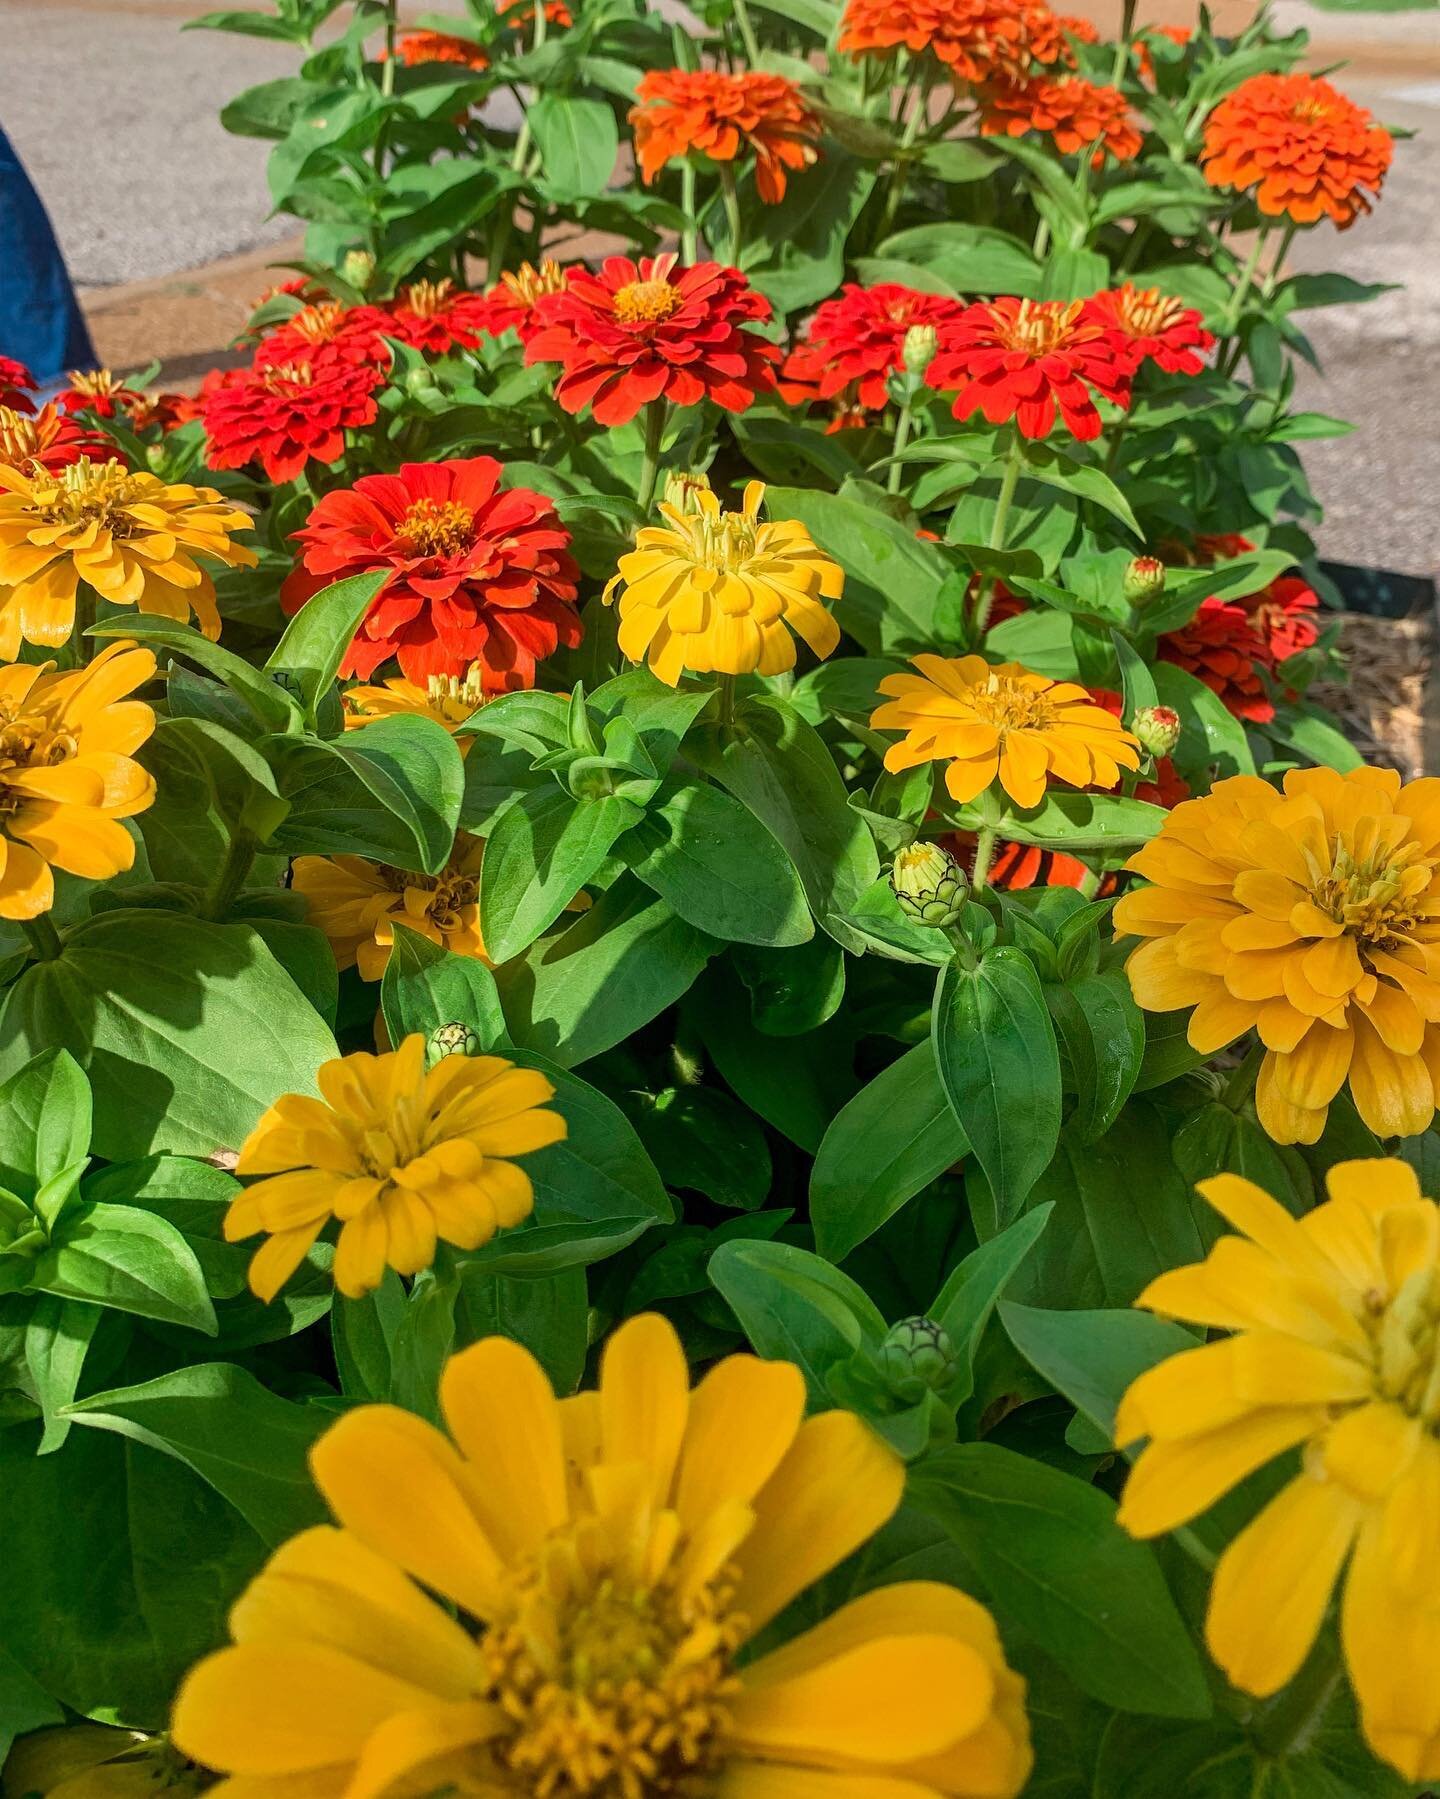 It&rsquo;s 🍁Fall🍁 y&rsquo;all and our supply shows it! Now in: Mums, Asters, Petunias, Rudbeckia, Cone Flowers, and more!🌼🌸
Veggies (featuring Lettuce, Broccoli, Collards, Pak Choi, Sugar Peas, Brussels Sprouts, Cabbage and more!)🥦🥬🫛
Herbs (fe